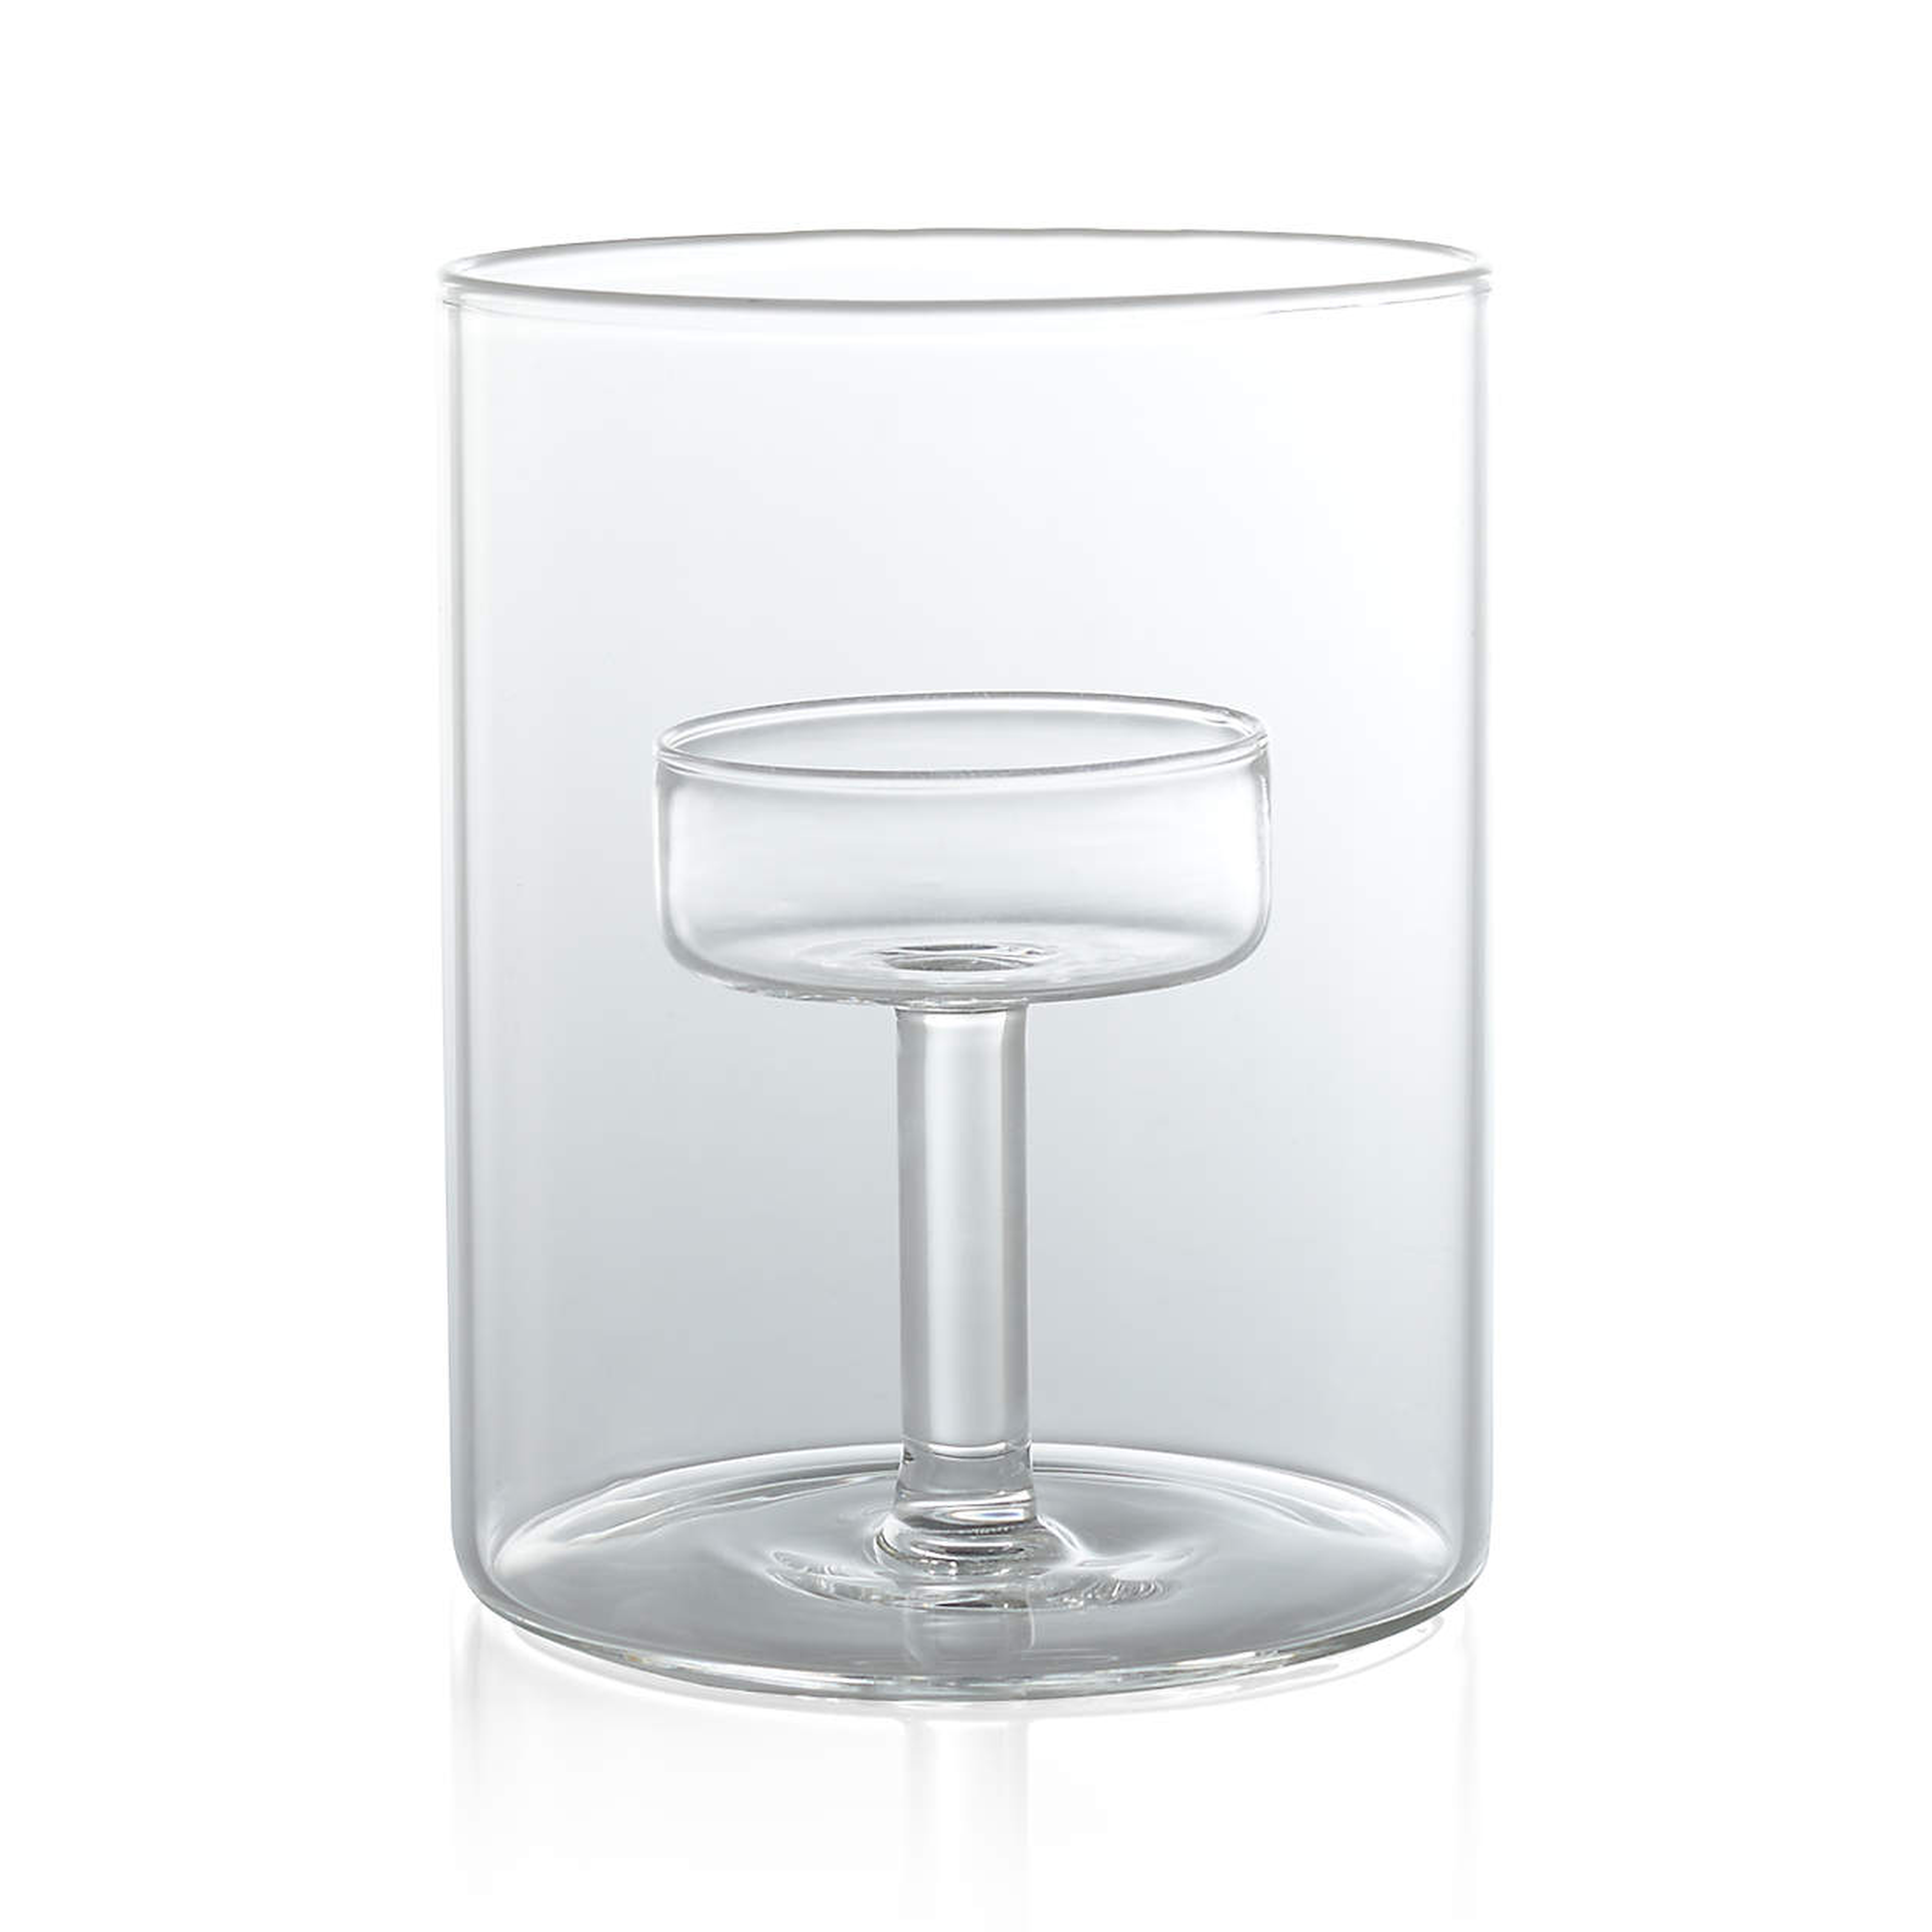 Elsa Small Glass Tealight Candle Holder - Crate and Barrel